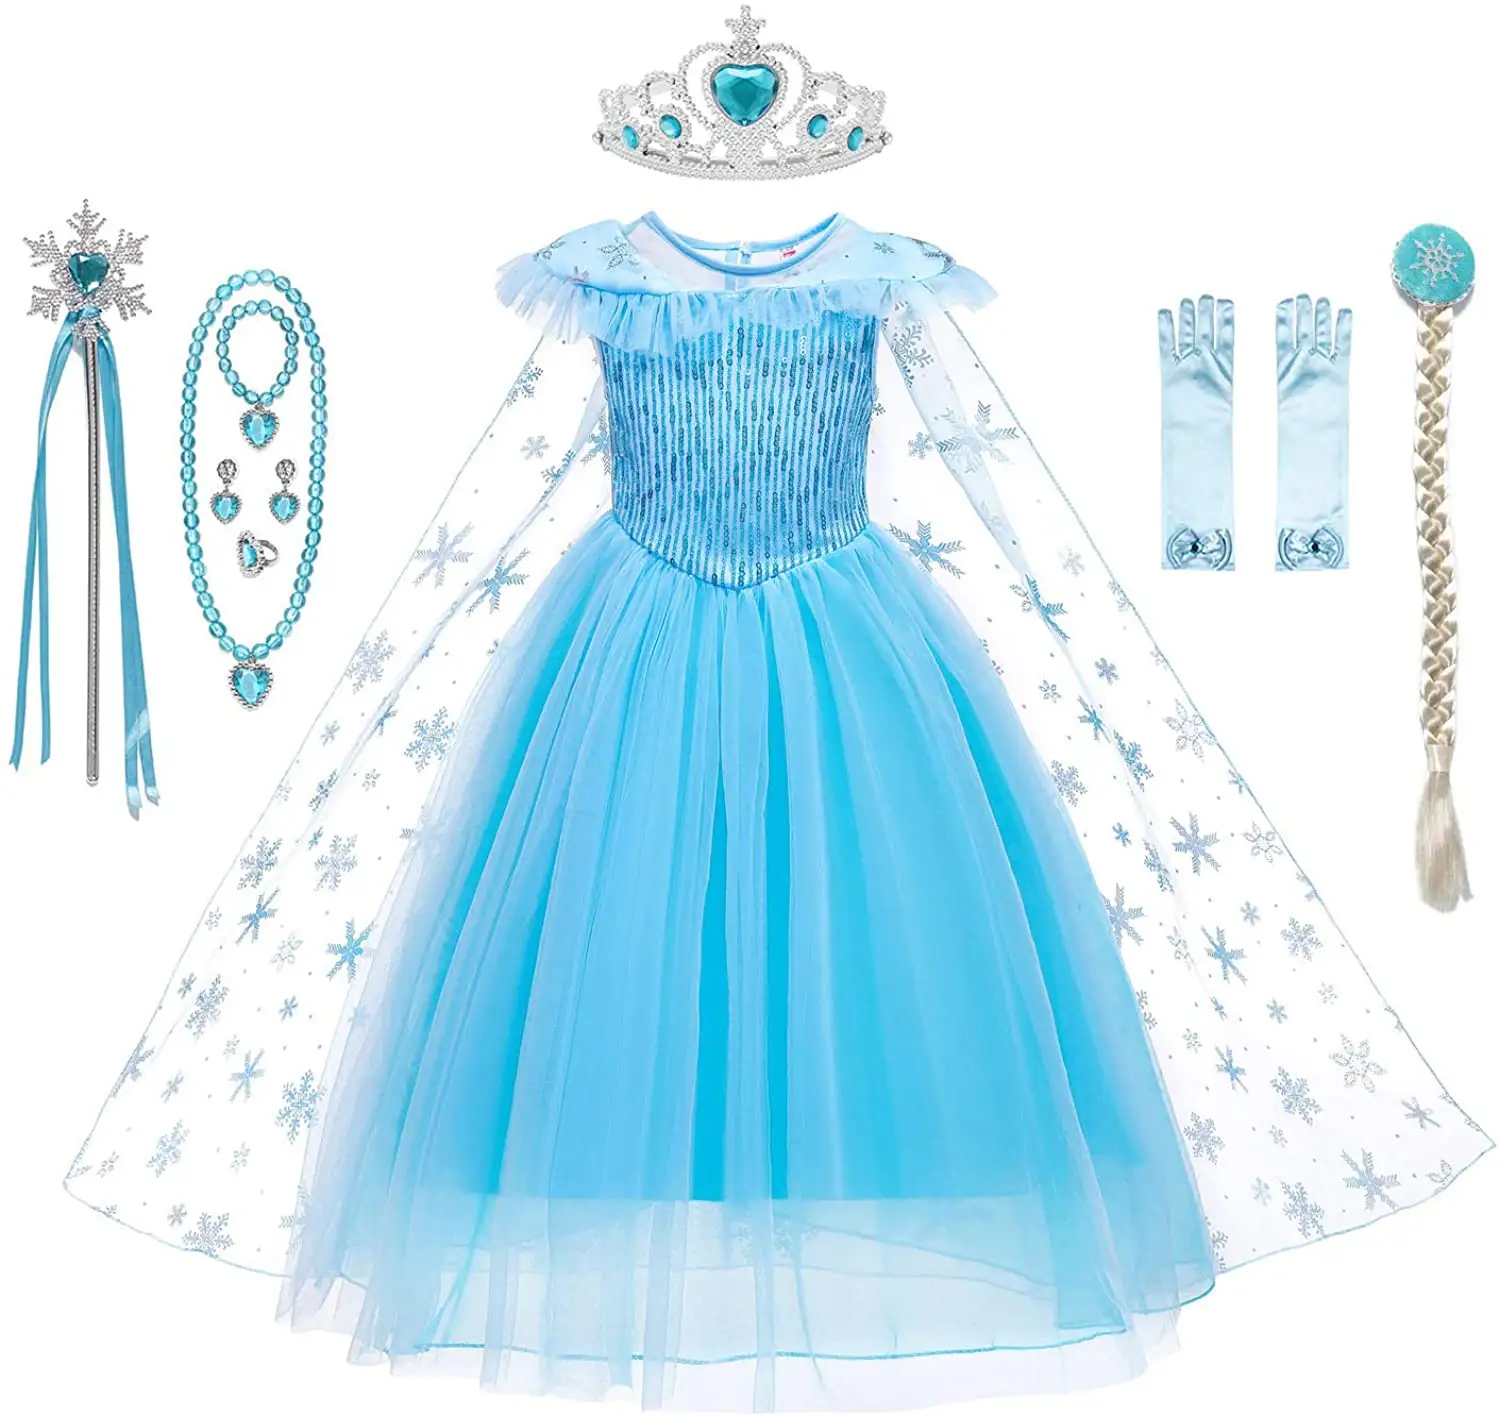 Girls Princess Costume Party Fancy Dress Halloween Costume with Accessories